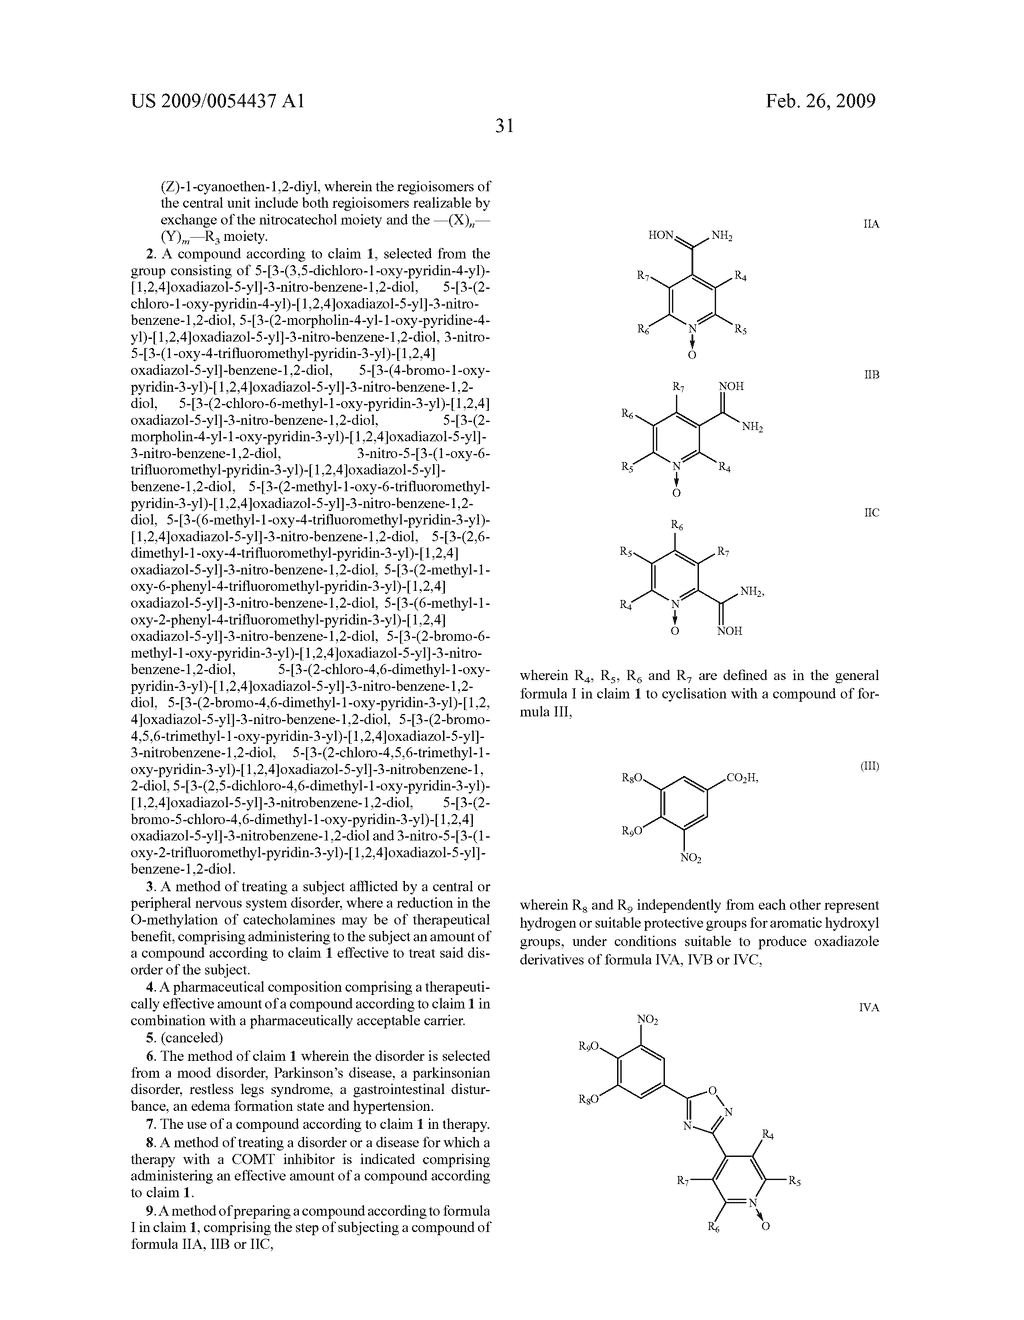 Nitrocatechol Derivatives as Comt Inhibitors - diagram, schematic, and image 32